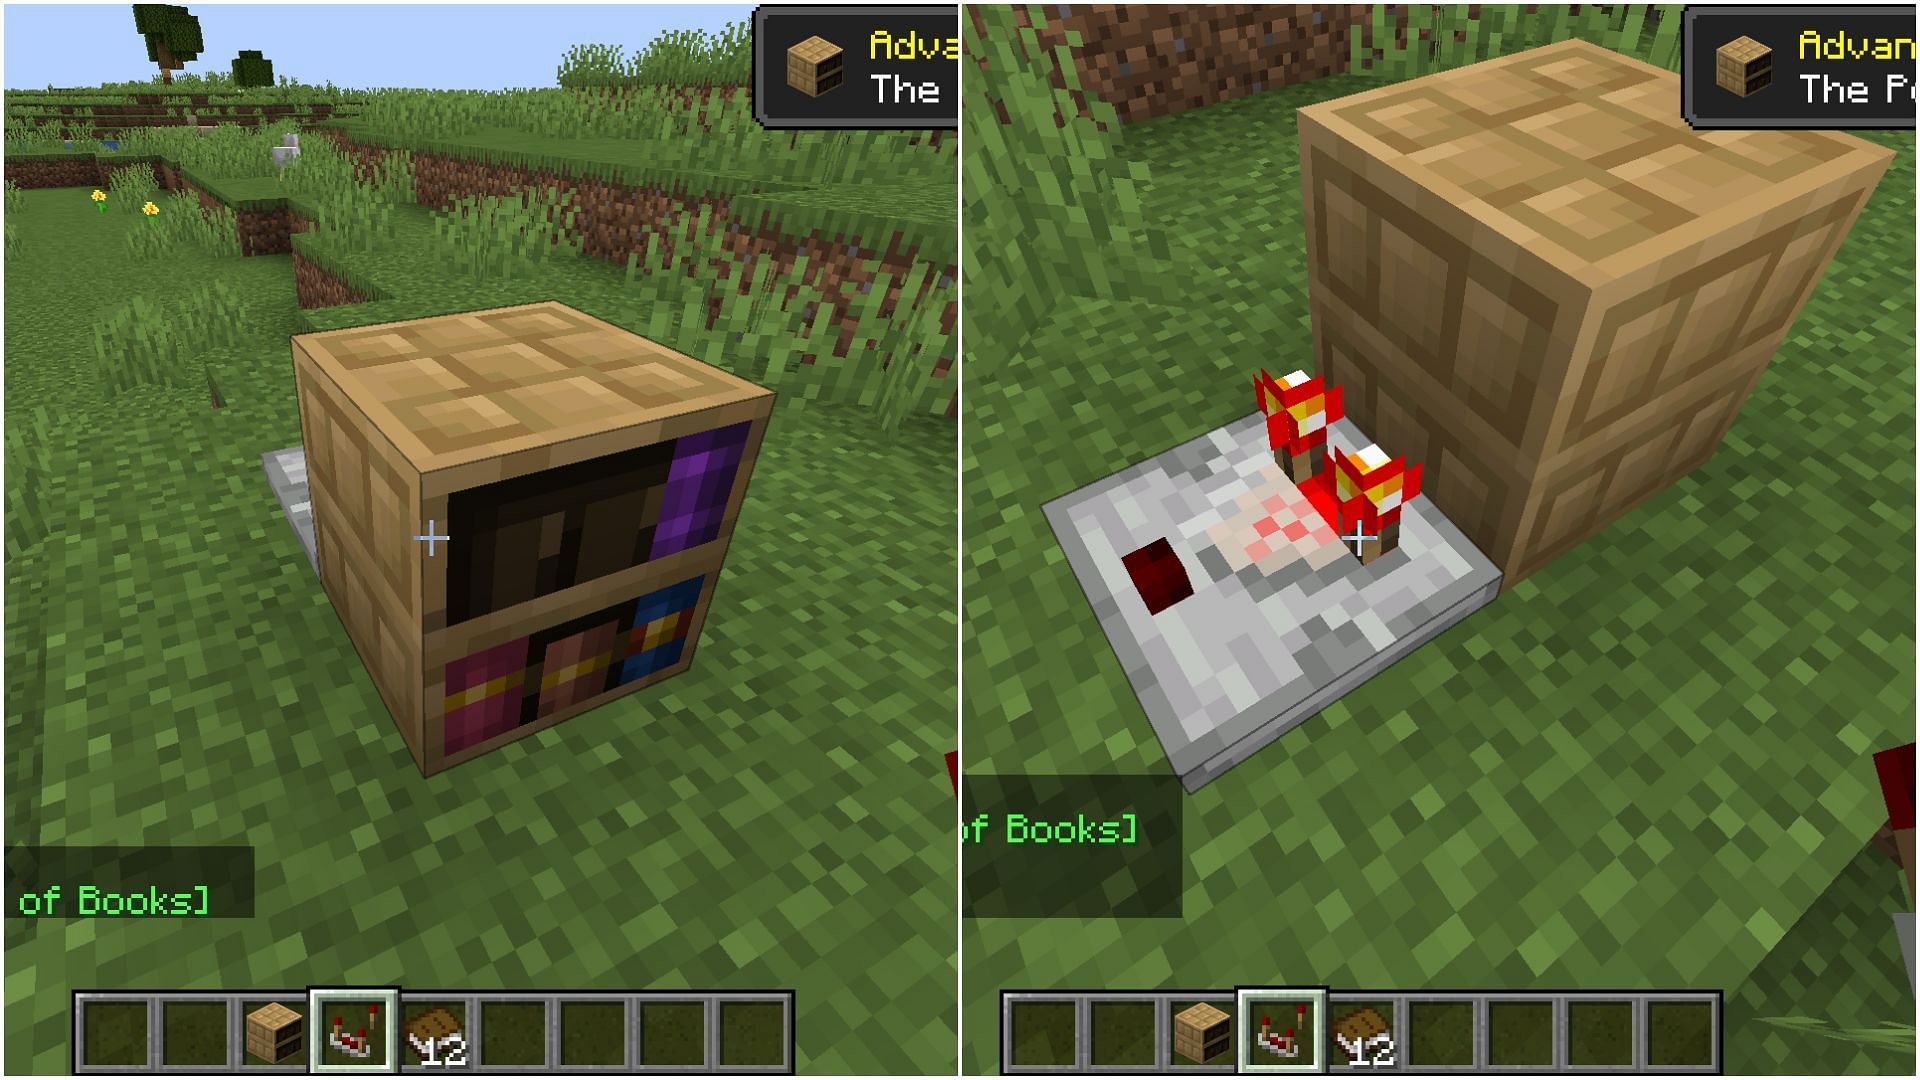 22w46a introduced the way to place books on any slot of a chiseled bookshelf.  Your thoughts? : r/Minecraft